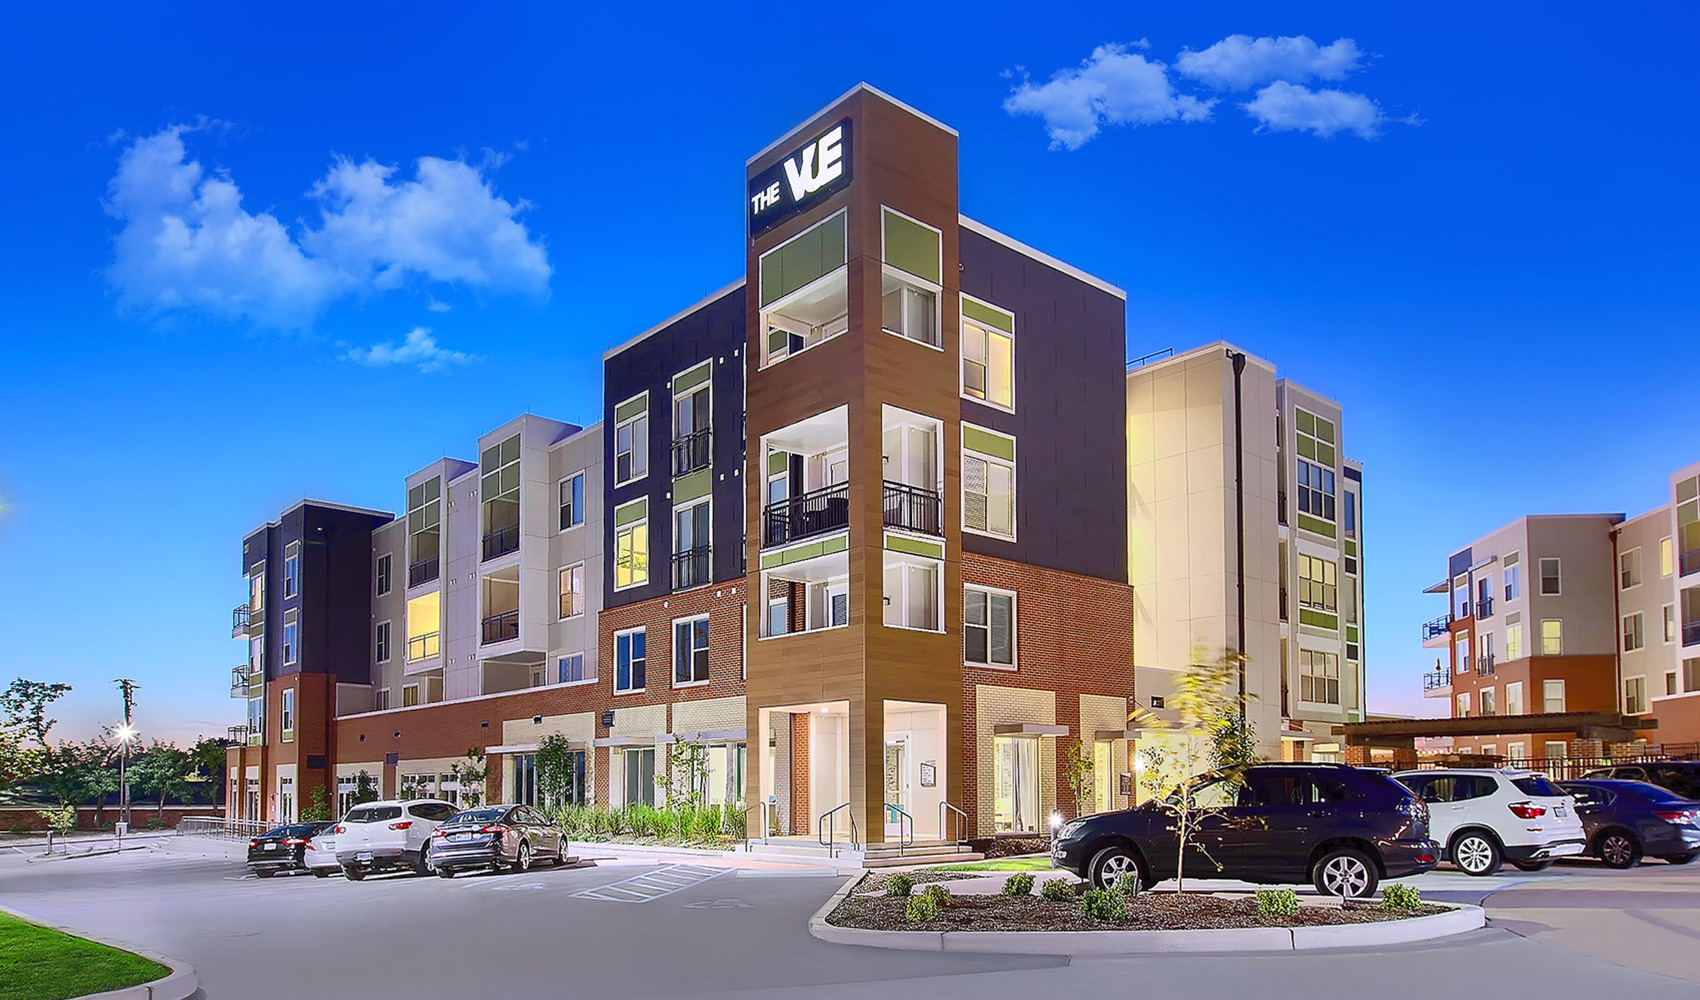 Hero image for The Vue at Creve Coeur Apartments at 1001 Old Olive Way Creve Coeur, MO 63141